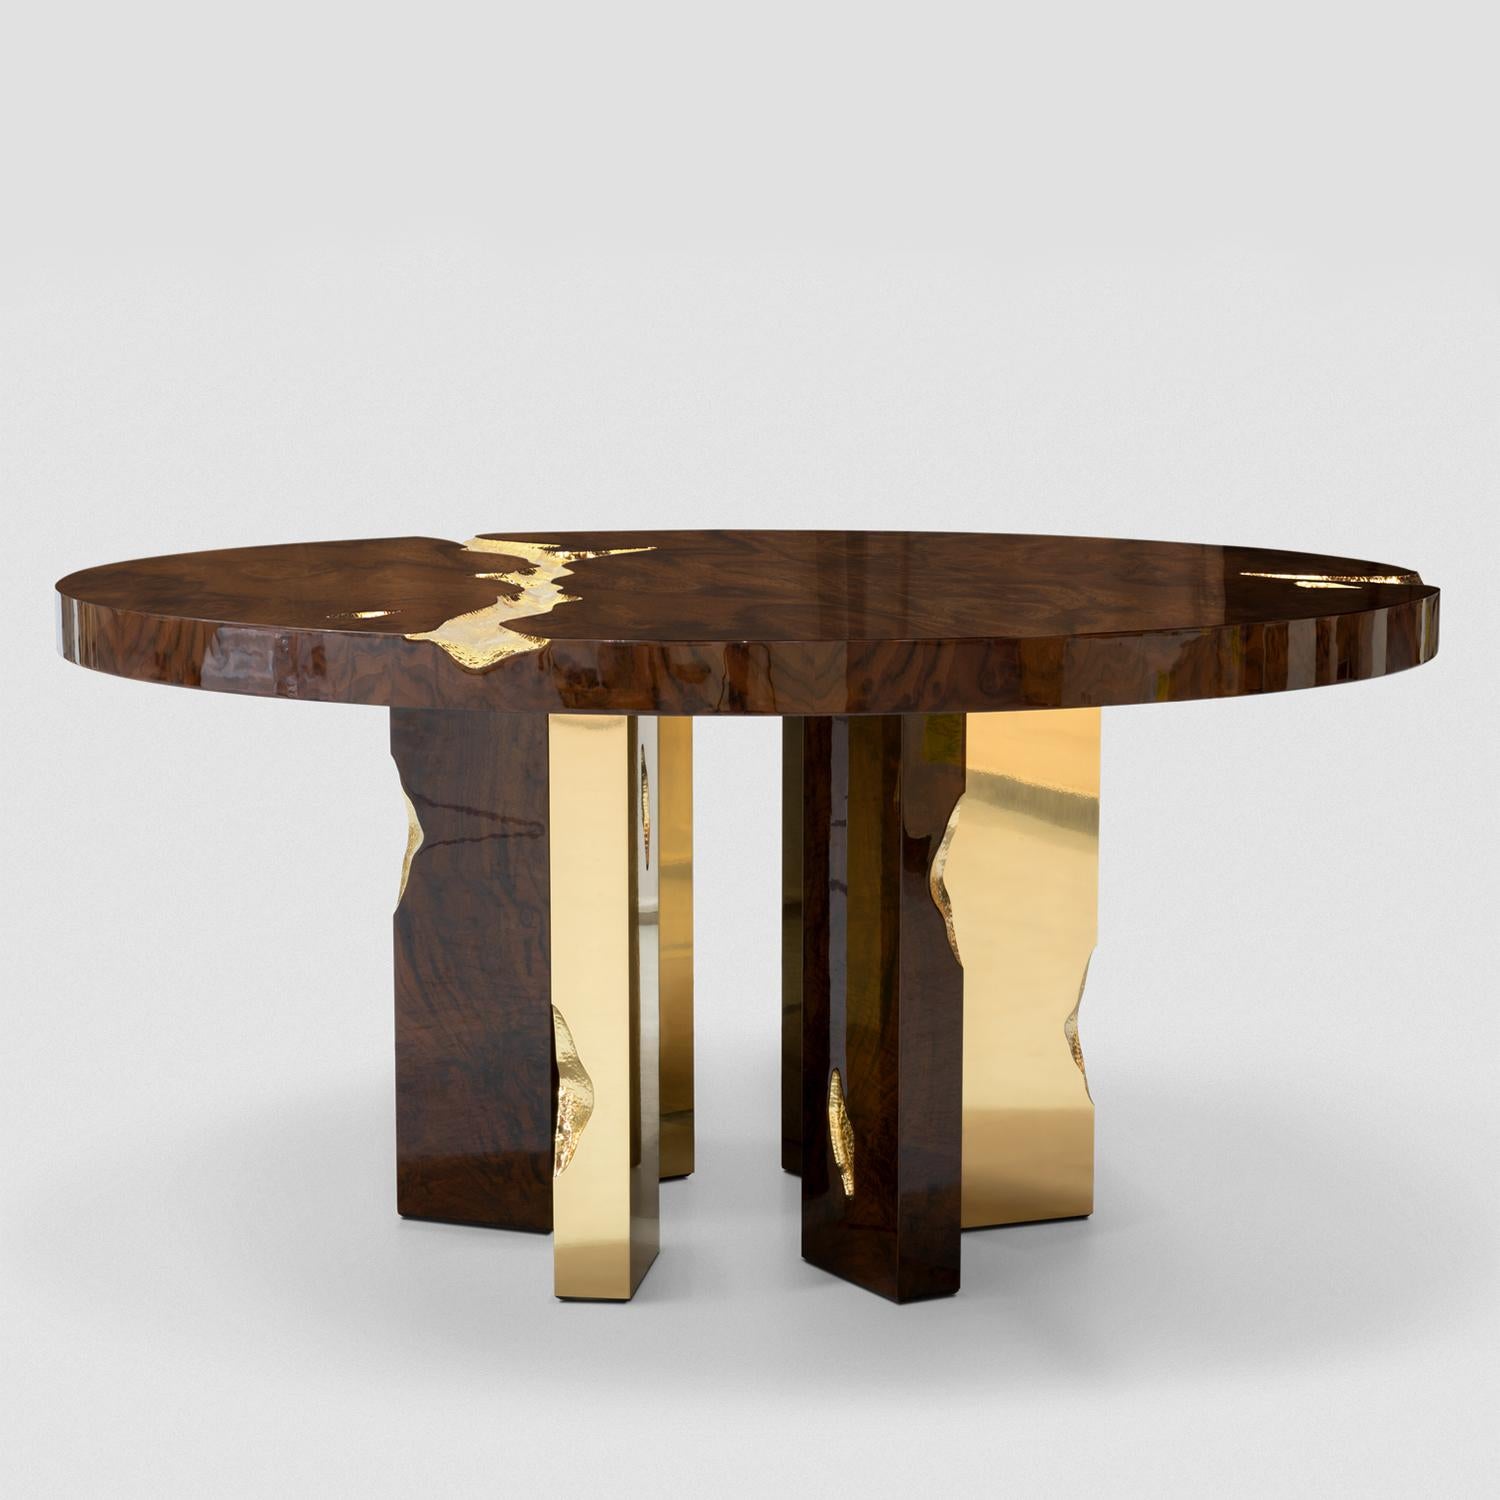 Dining table Majestic mahogany with structure in wood covered with
mahogany veneer and with feet in polished solid brass and details in
solid hammered polished brass.